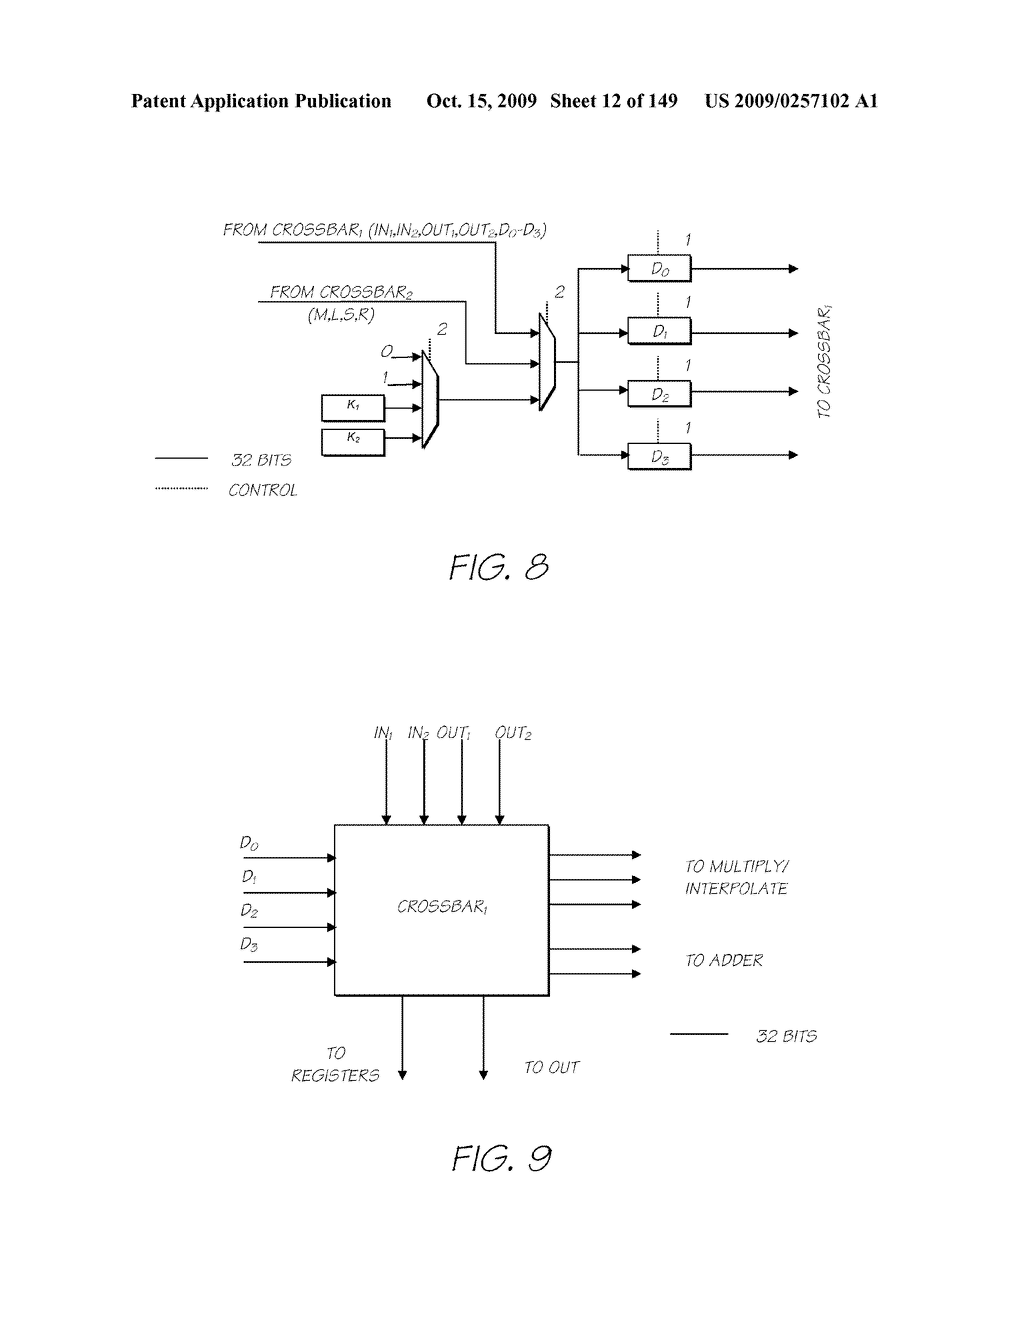 IMAGE PROCESSING APPARATUS HAVING CARD READER FOR APPLYING EFFECTS STORED ON A CARD TO A STORED IMAGE - diagram, schematic, and image 13